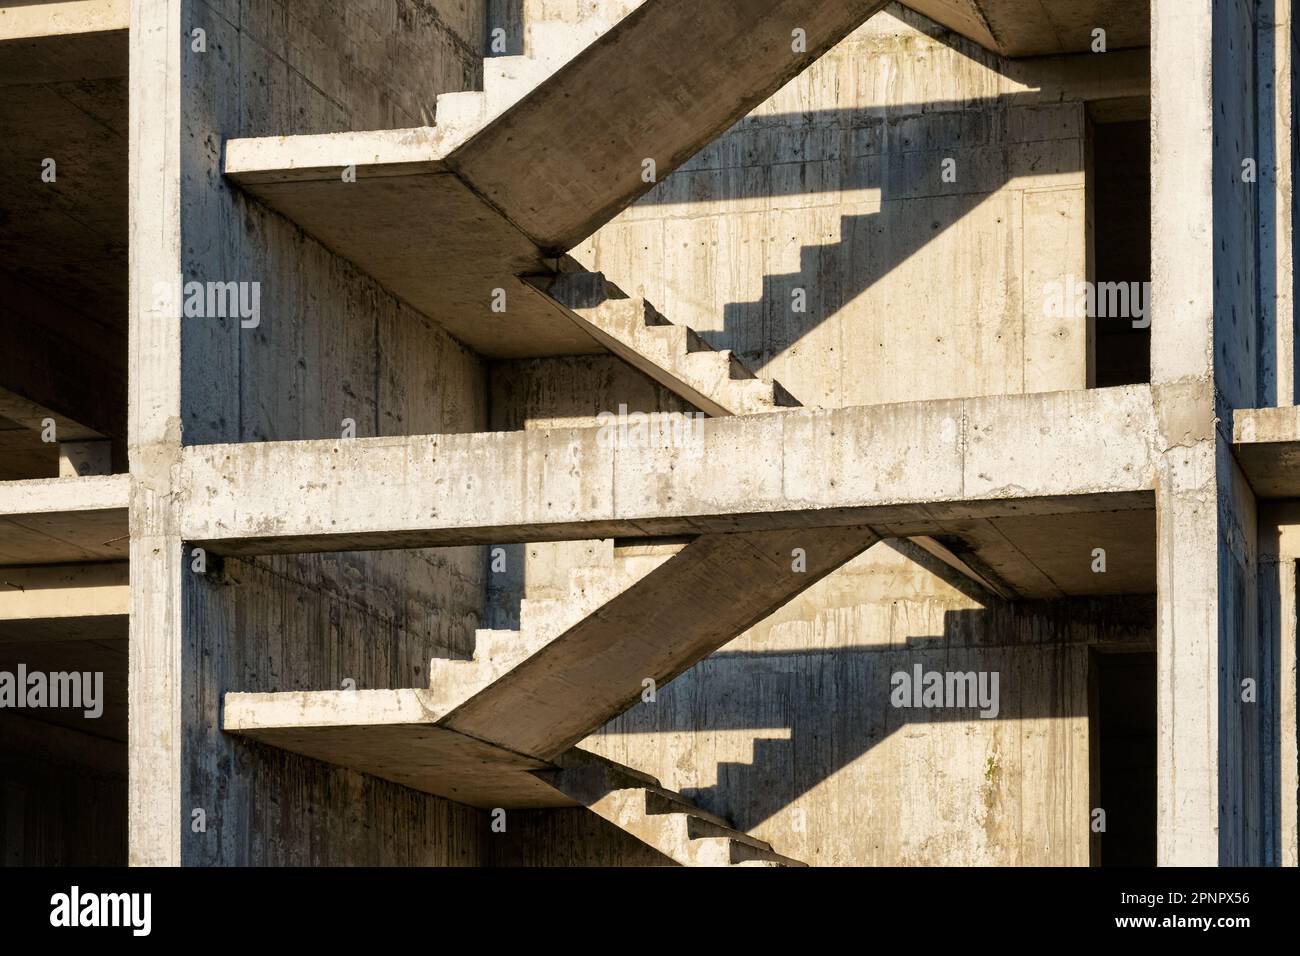 Abstract minimal geometric architecture pattern. Concrete stairs in building construction site. House construction. Industrial background Stock Photo